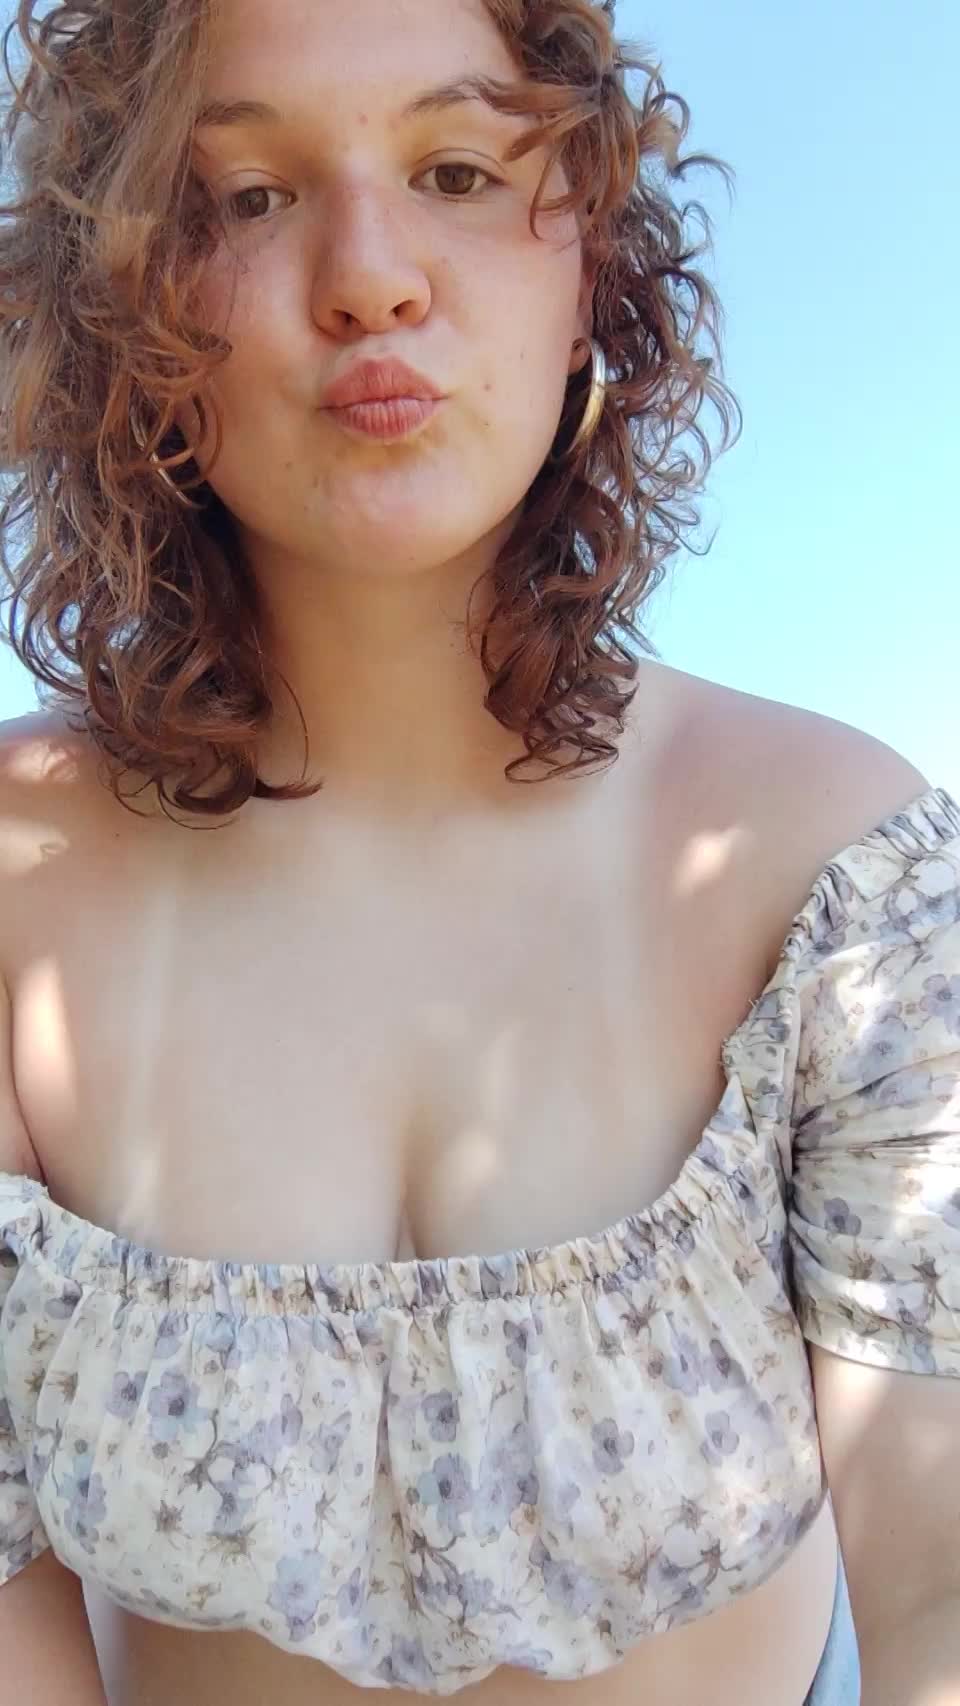 Flashing my pale tits outside make me excited : video clip